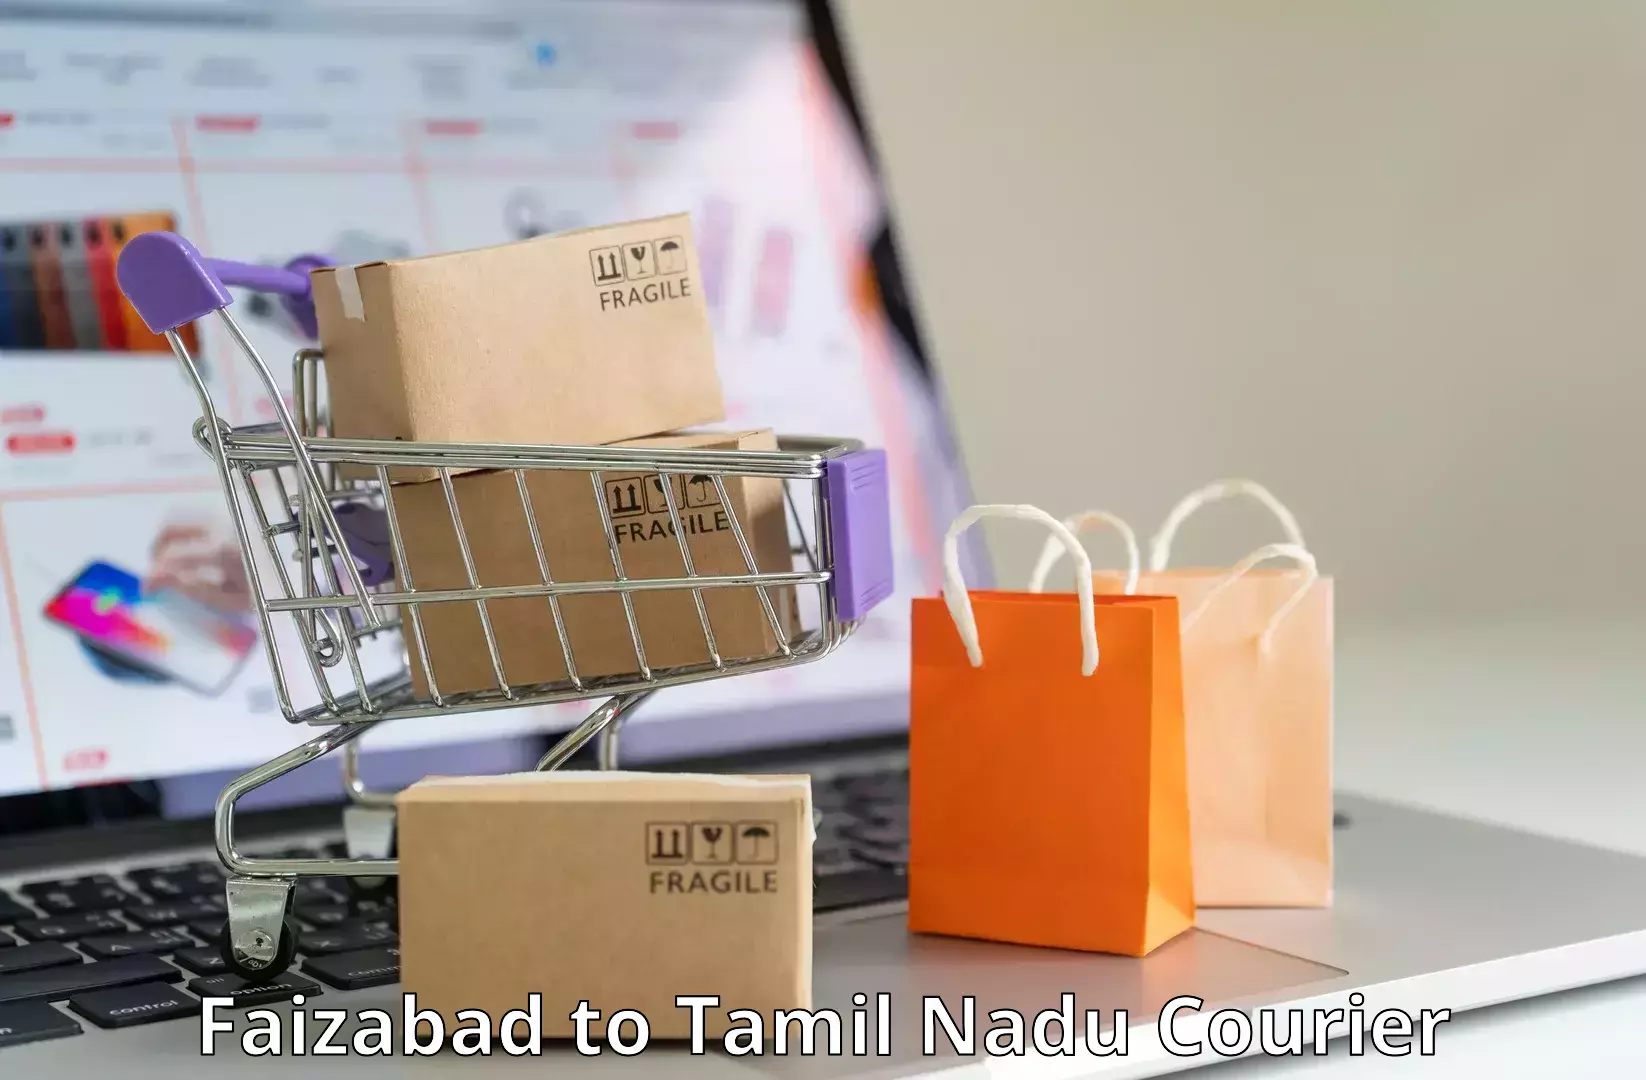 Customizable delivery plans Faizabad to Tamil Nadu